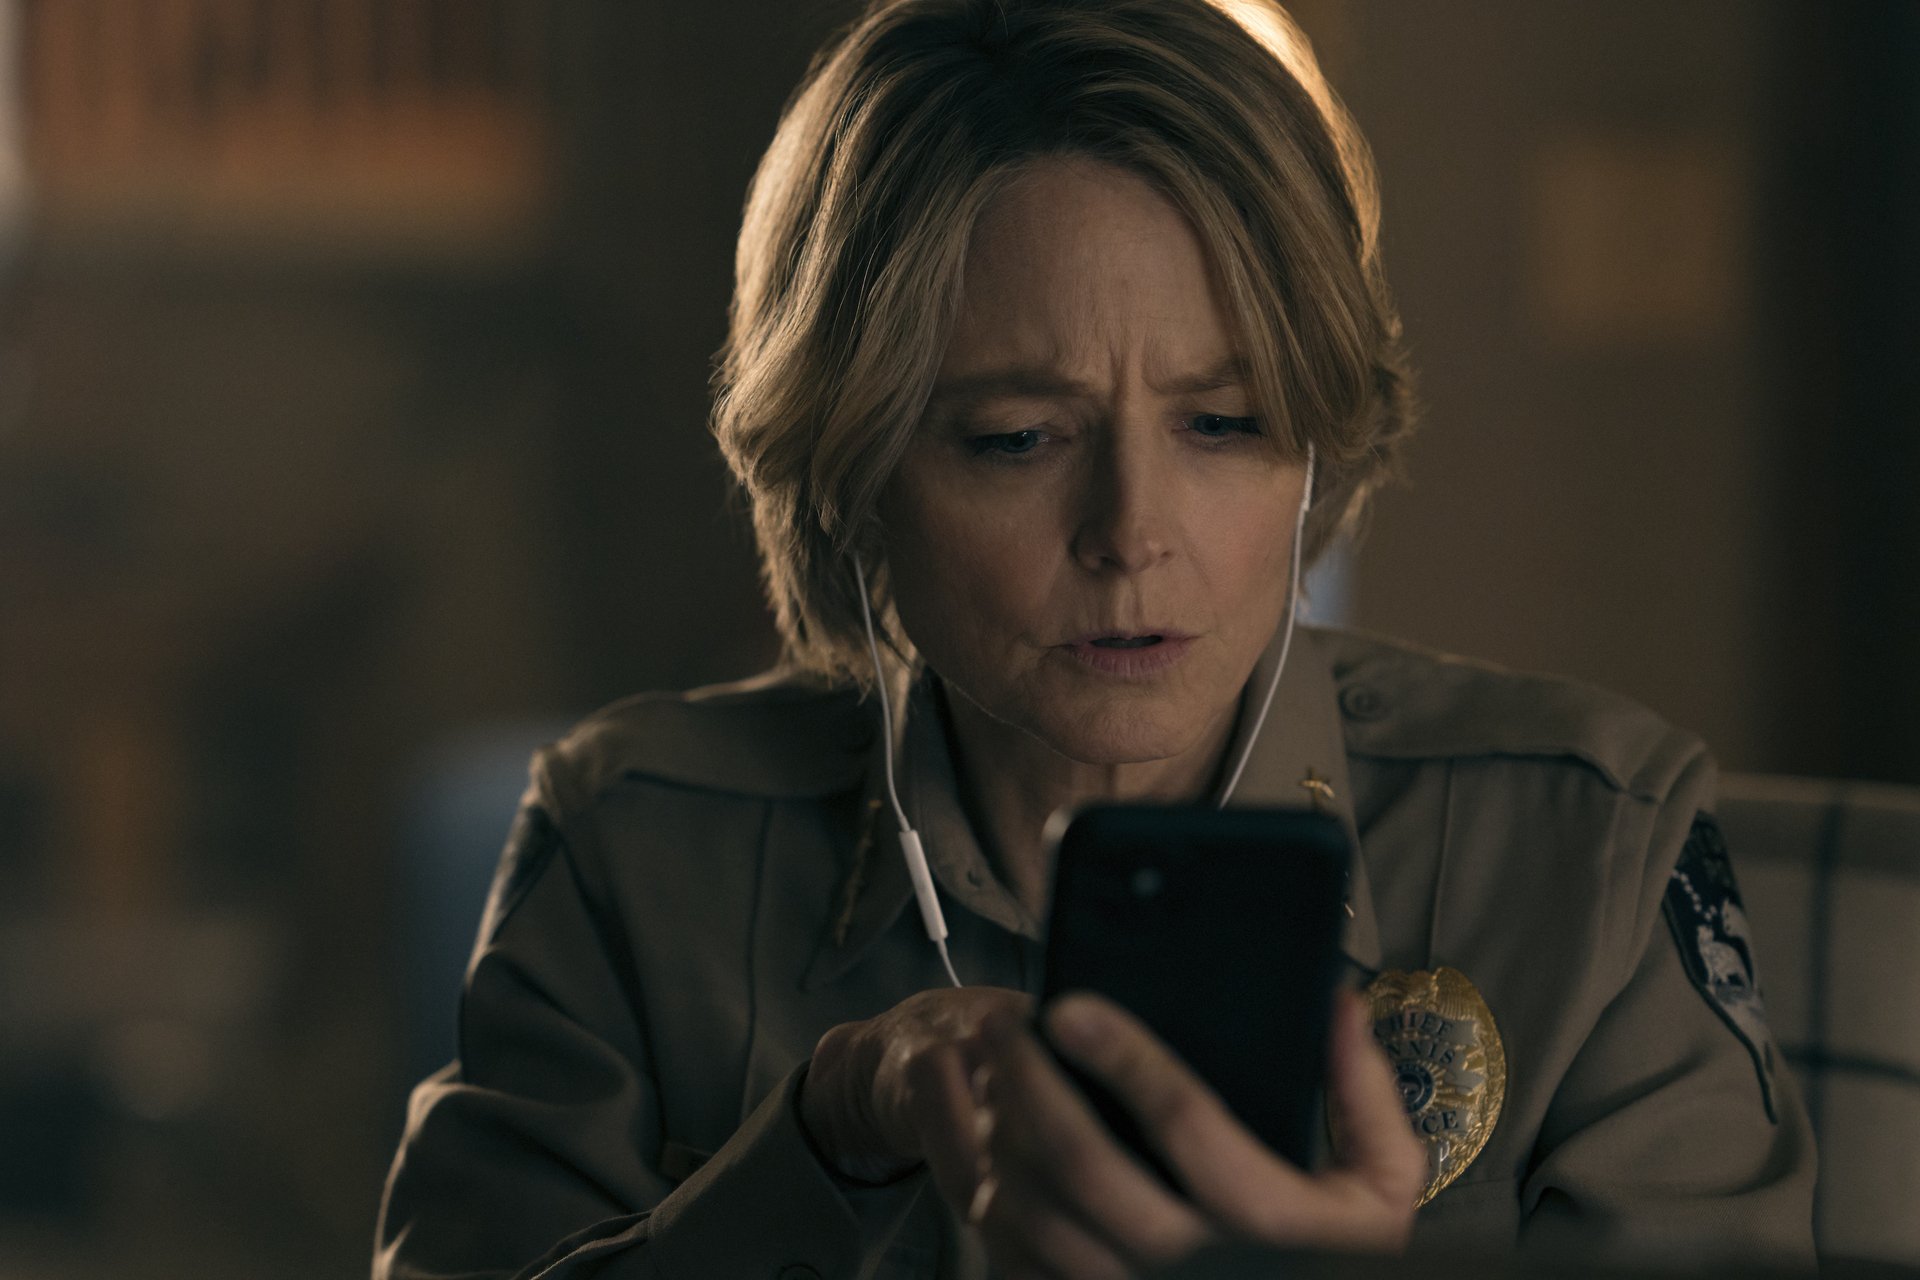 A woman in a police uniform watches something on her phone.